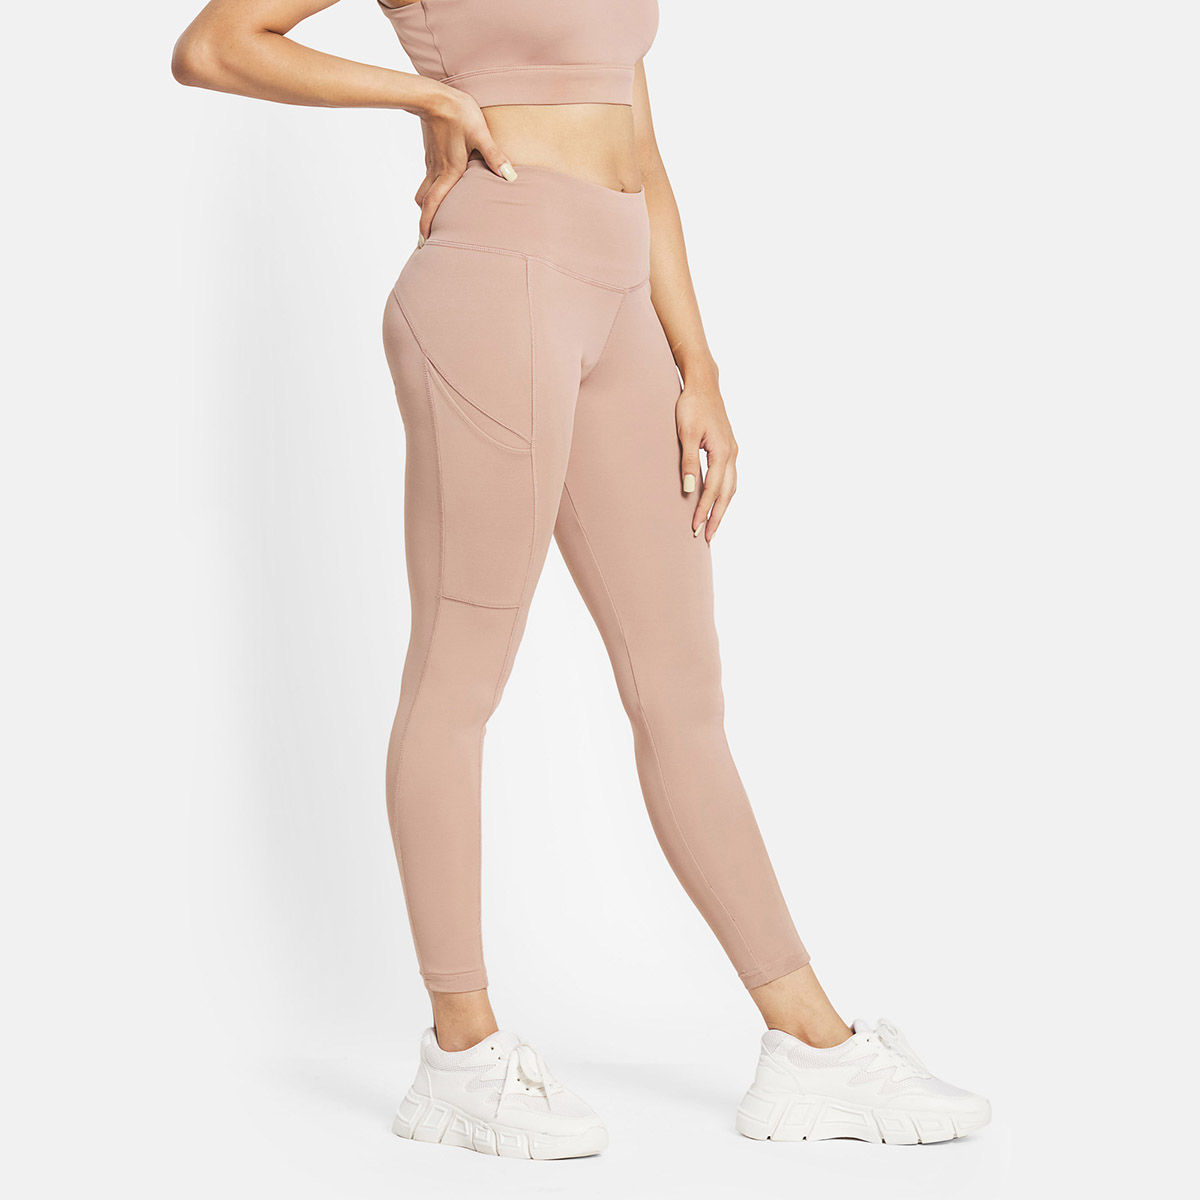 Buy Kica High Waisted Leggings In Signature Buttery Soft Fabric Online